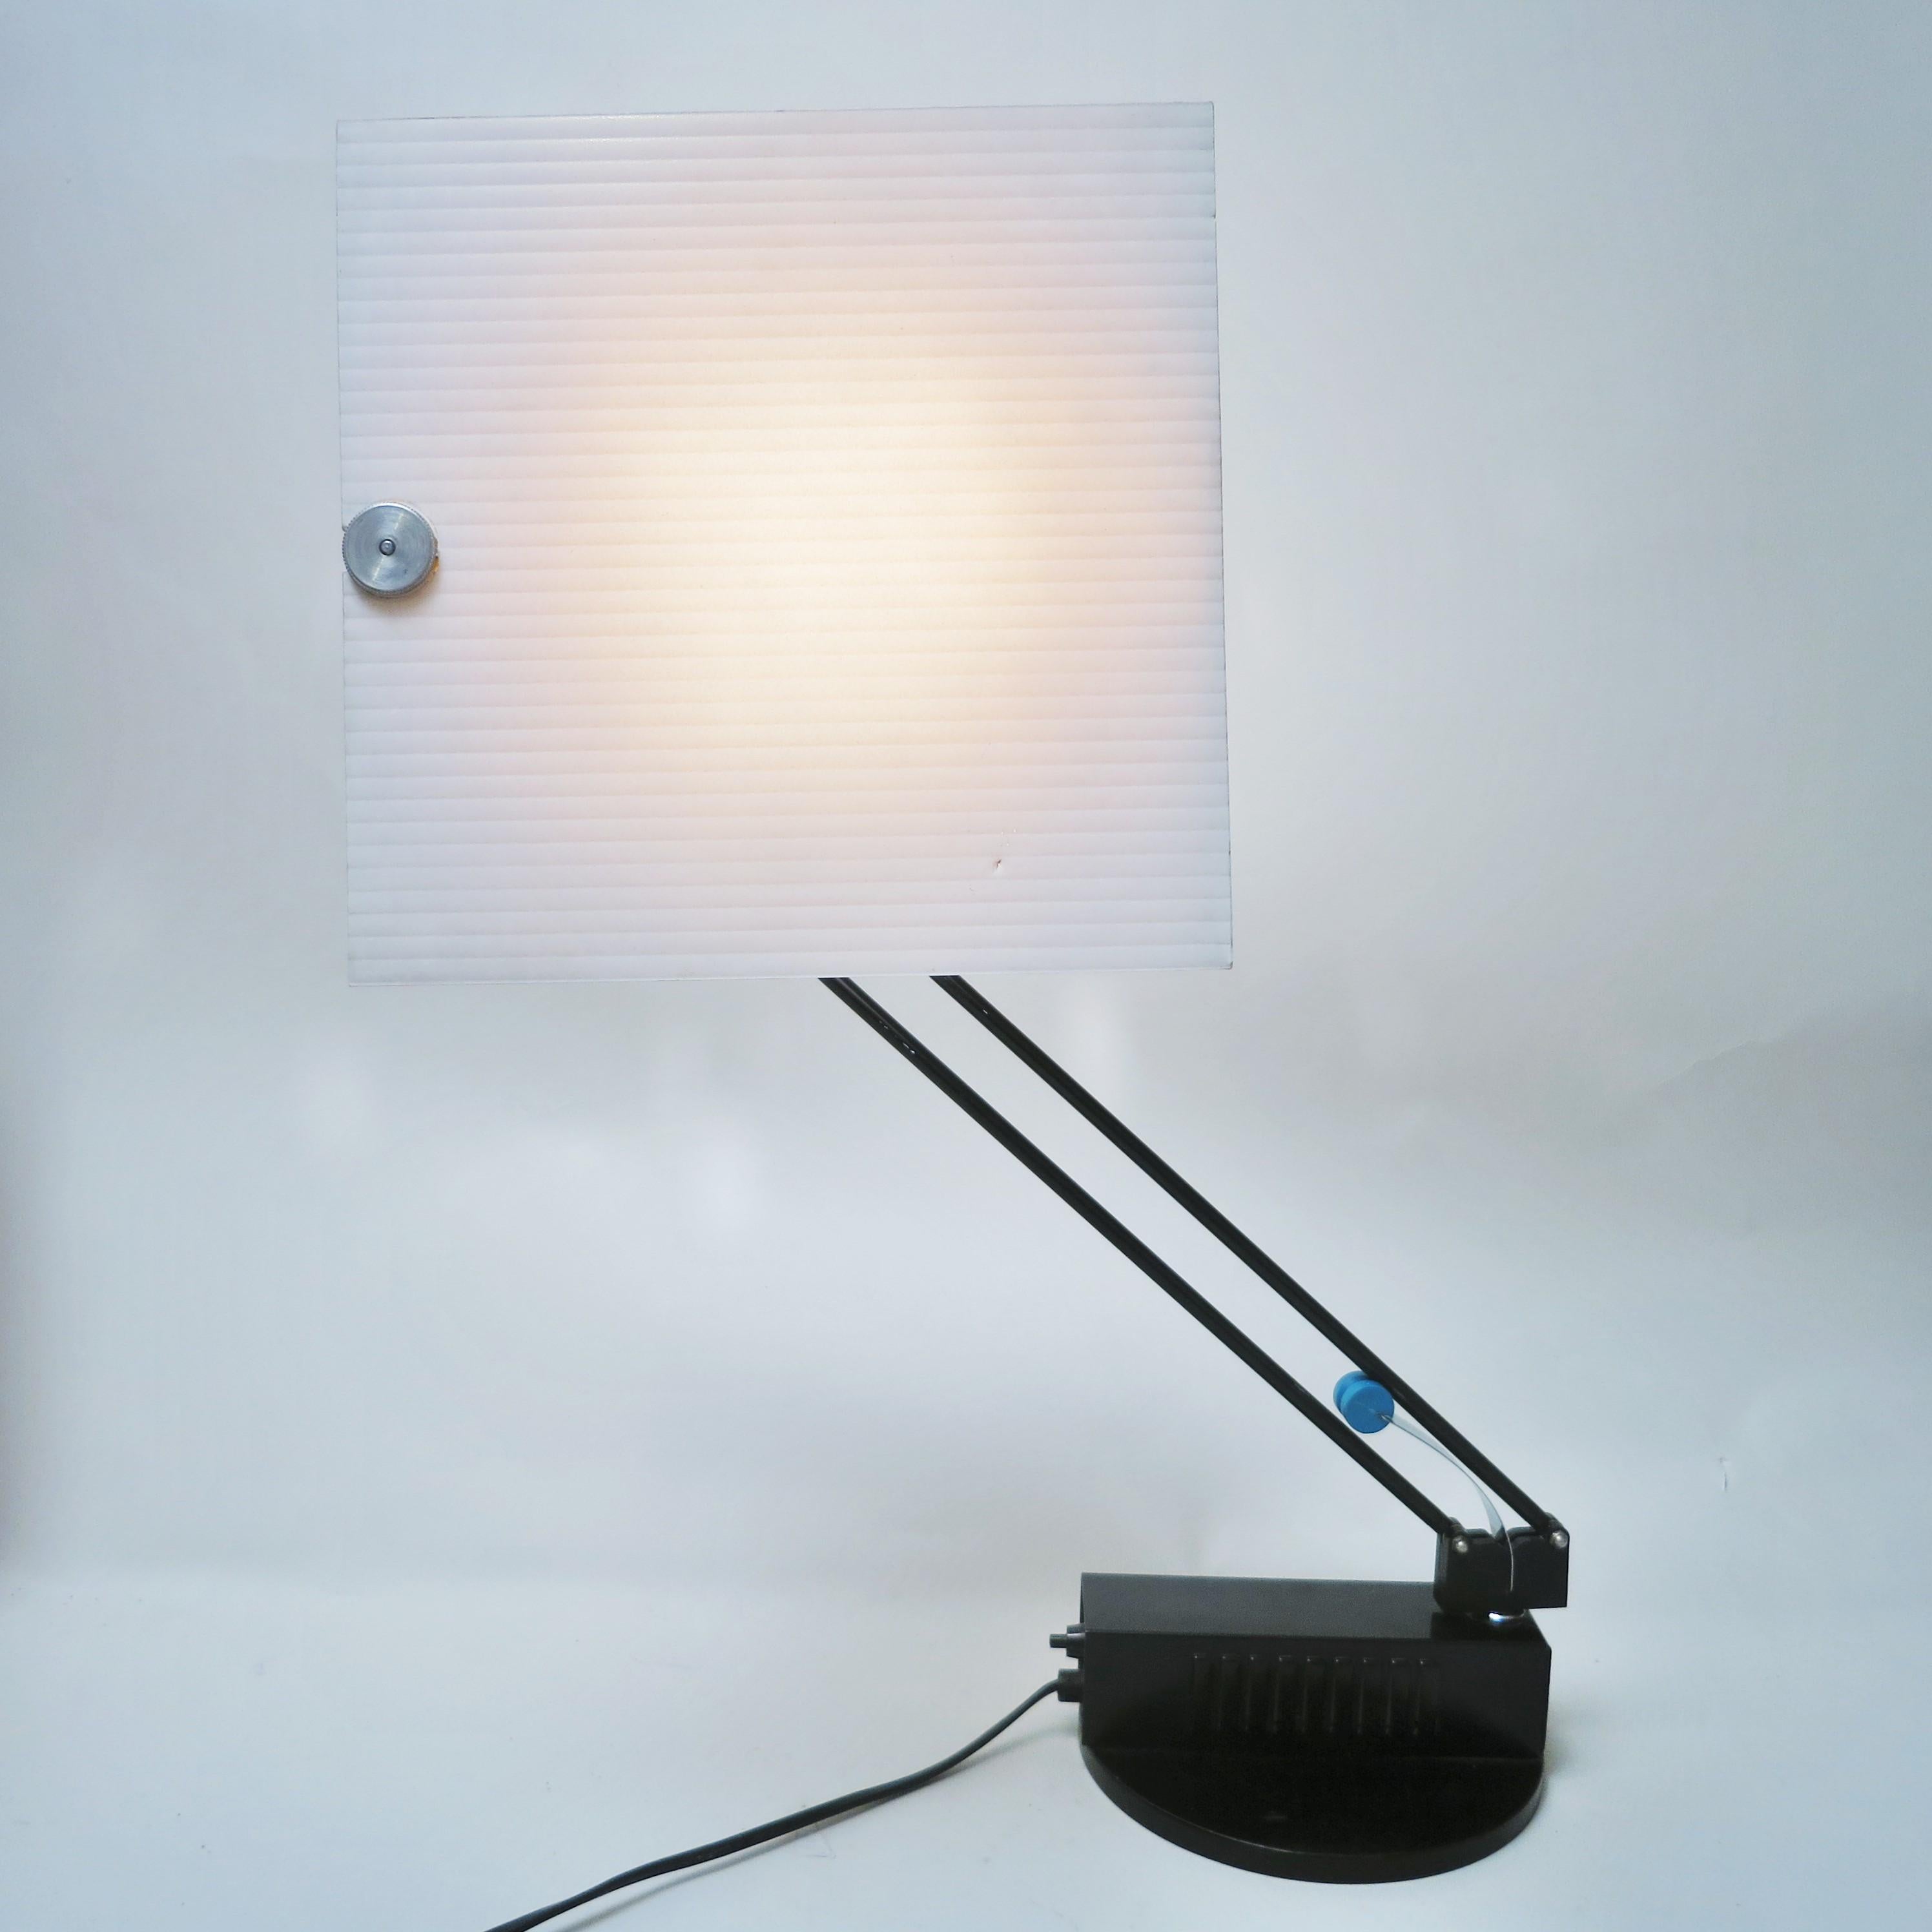 Orientable and swivel lamp W.O. designed by French Designer Sacha Ketoff and produced by Aluminor in 1985.
The lamp is a tribute to Wilbur et Orville Wright brothers, airplanes pionneers. Because the structure remains the structure of the first